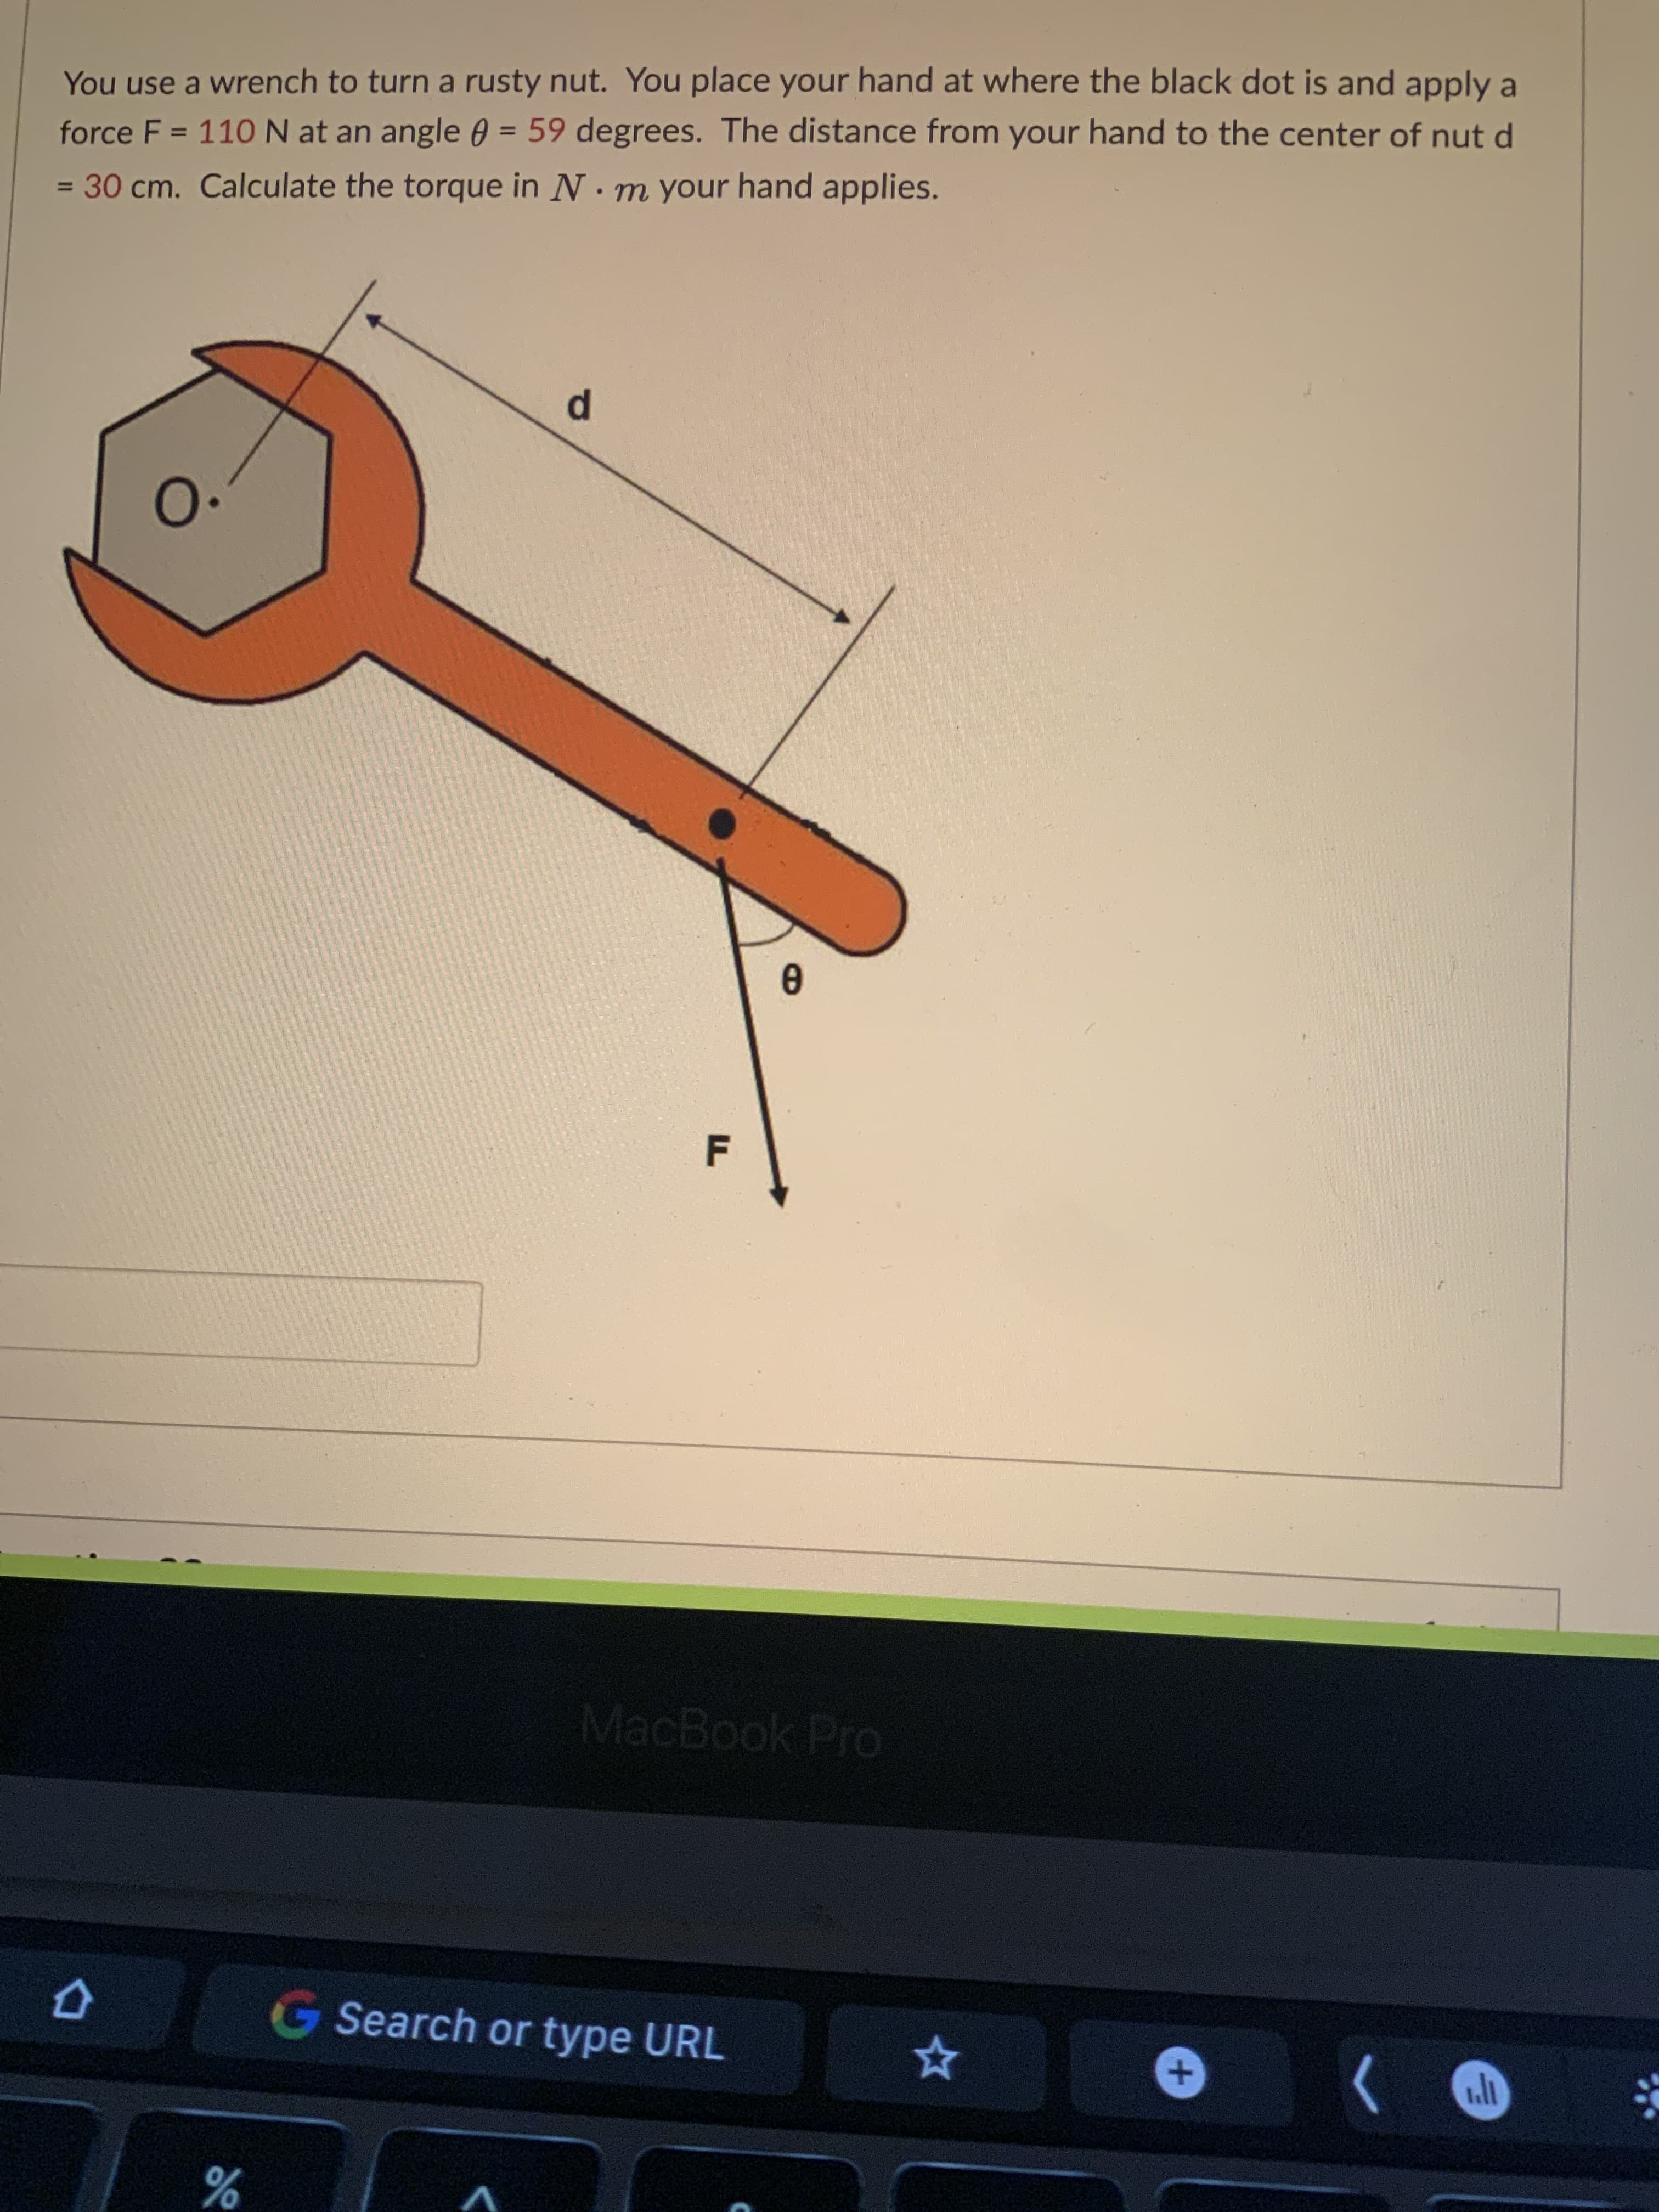 +,
F.
You use a wrench to turn a rusty nut. You place your hand at where the black dot is and apply a
force F = 110N at an angle 0 = 59 degrees. The distance from your hand to the center of nut d
= 30 cm. Calculate the torque in N. m your hand applies.
%3D
%3D
%3D
p.
0.
MacBook Pro
G Search or type URL
